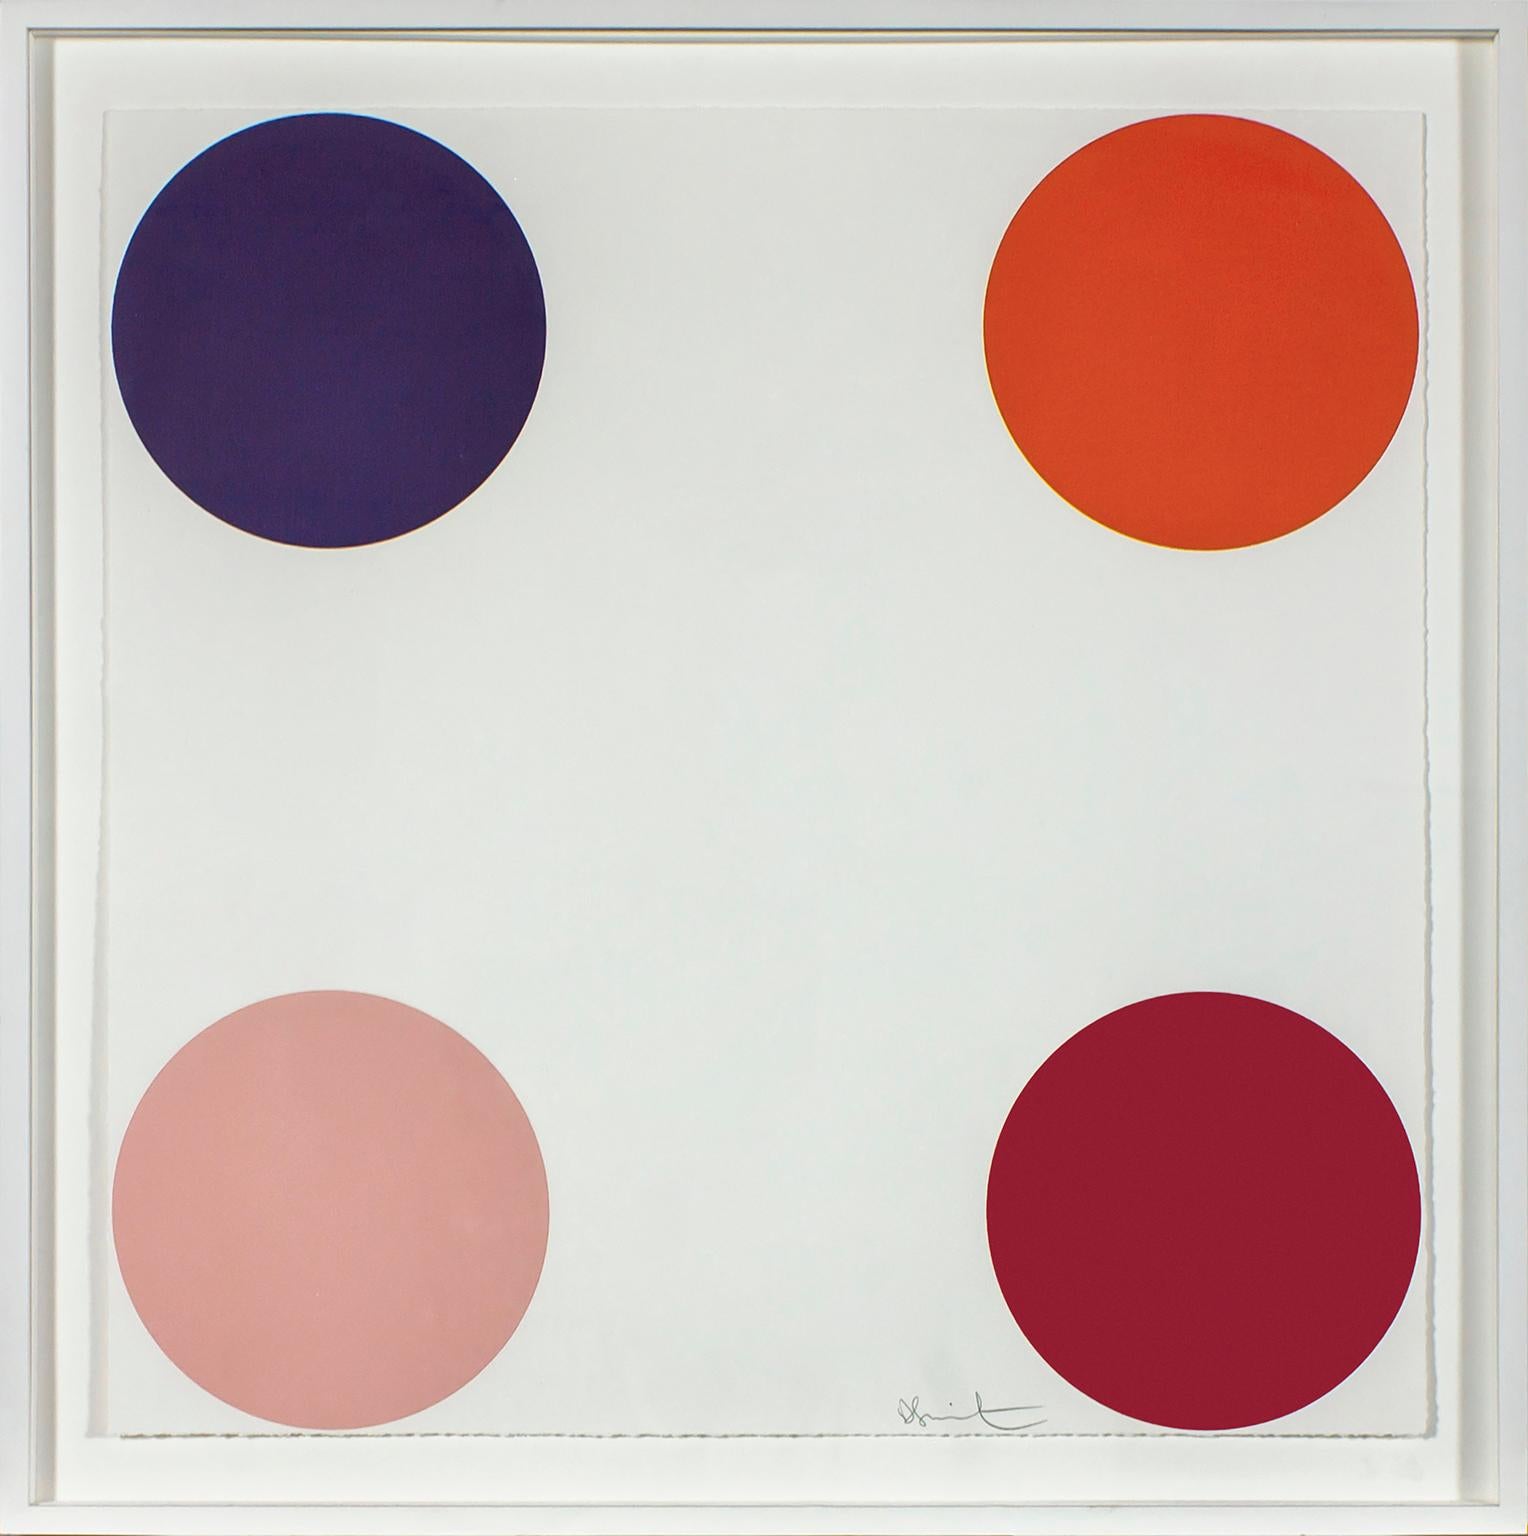 "Carbonyl Iron" color woodcut on paper by artist Damien Hirst. Signed lower right, numbered verso. Edition 23 of 55. Image size: 24 x 24 inches.